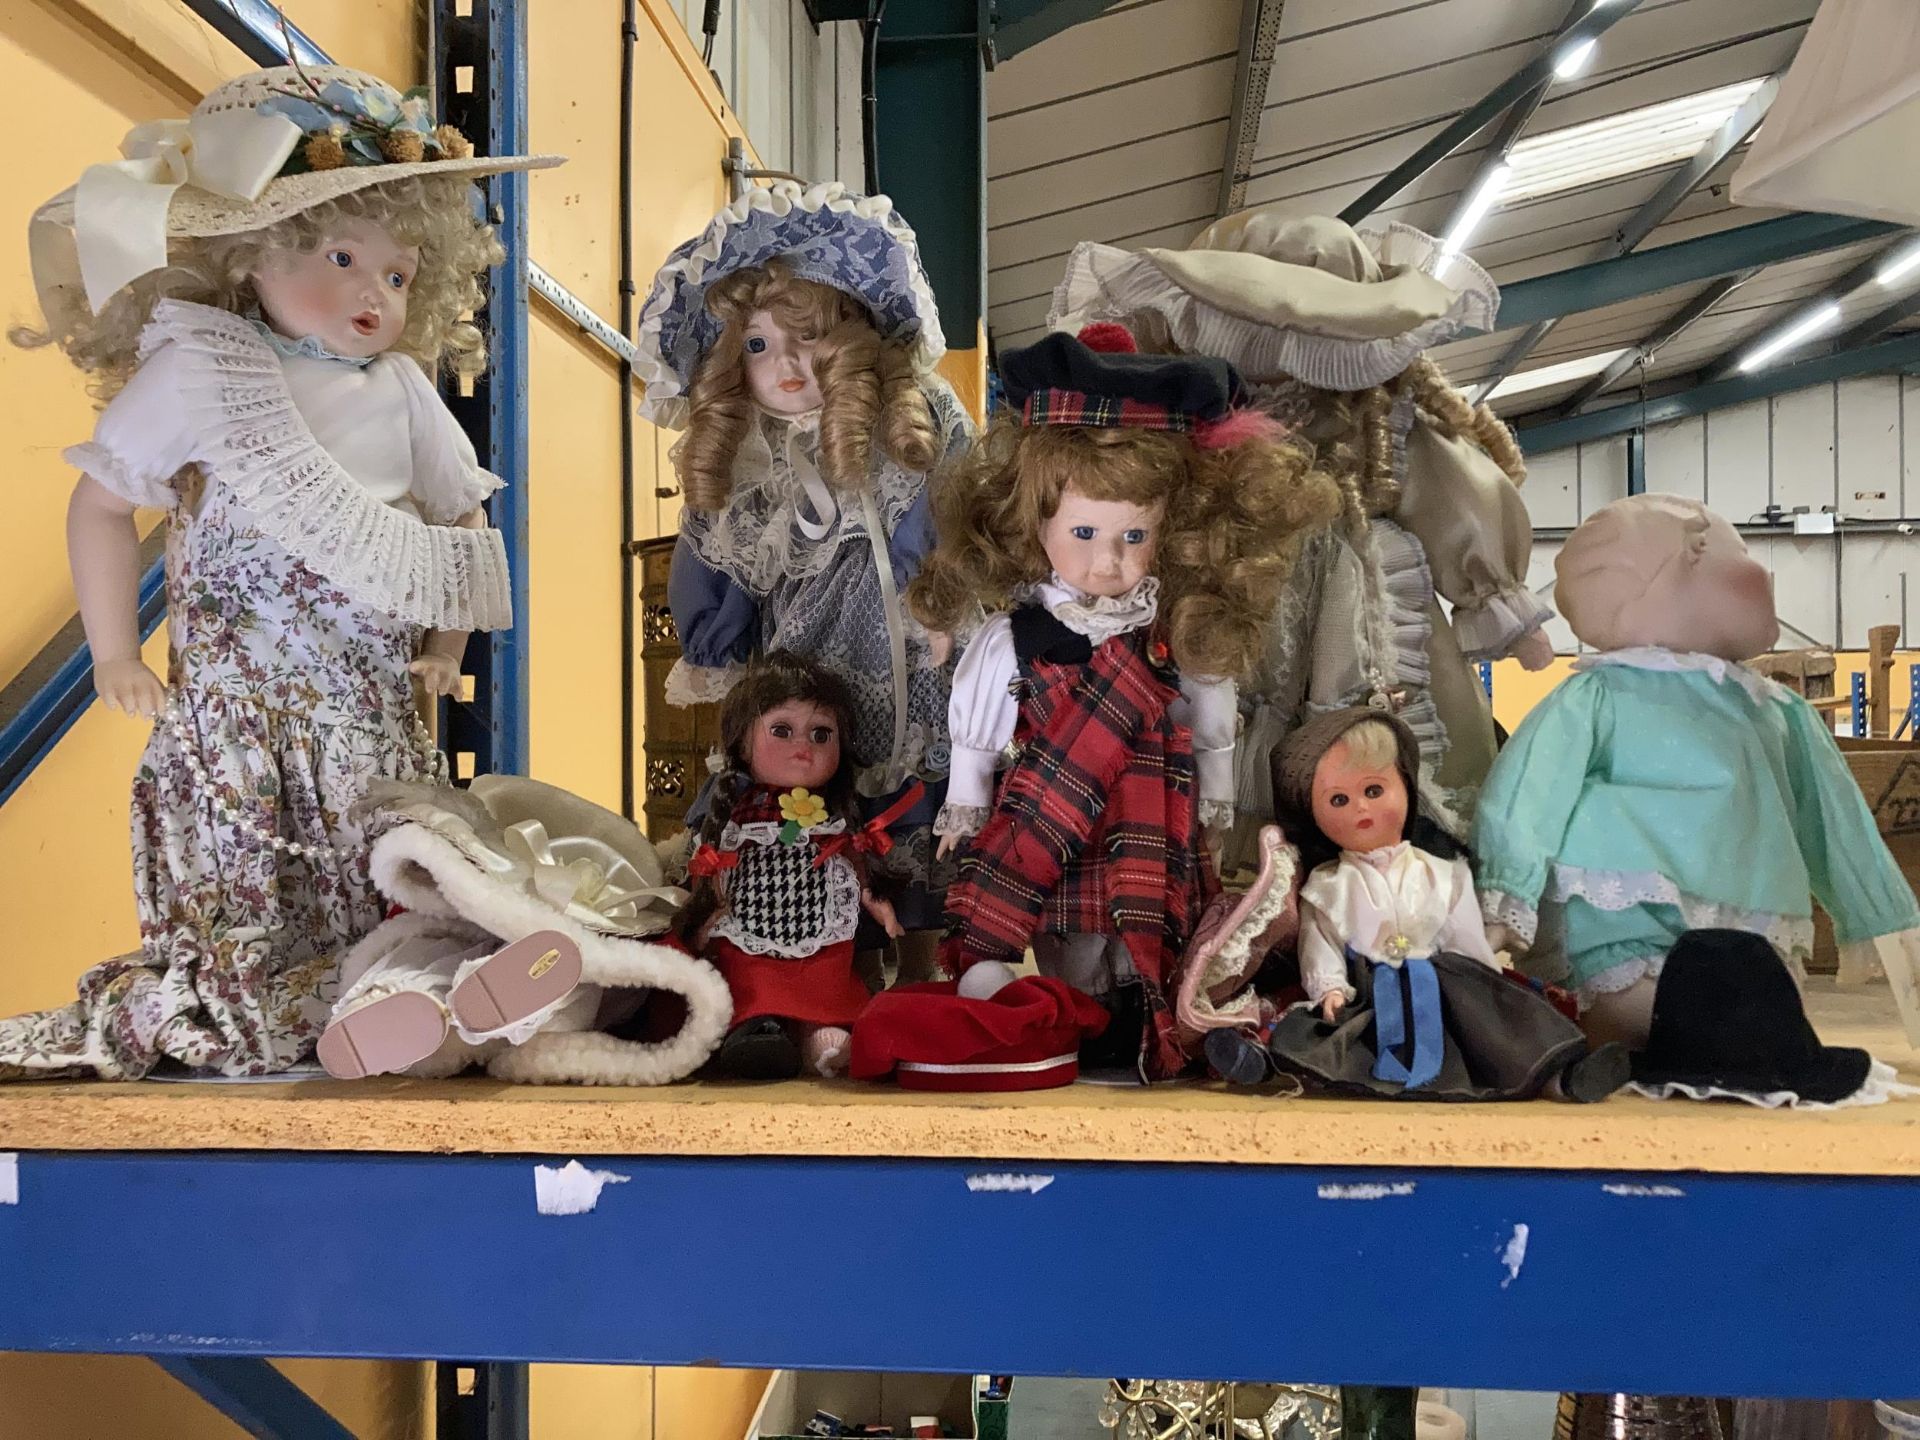 A QUANTITY OF COLLECTORS DOLLS, SOME ON STANDS - 8 IN TOTAL